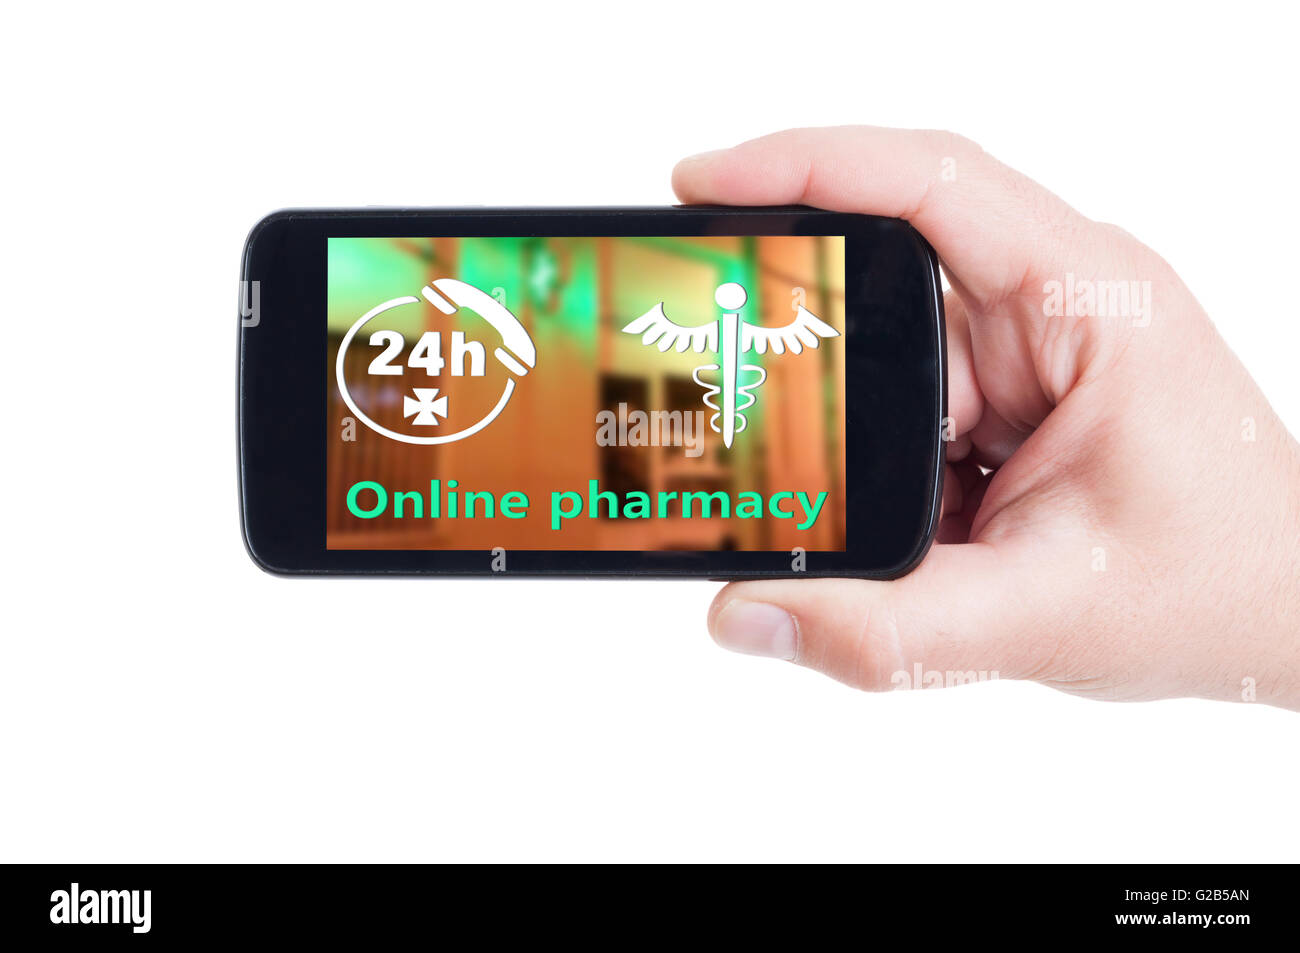 Online pharmacy concept on smartphone display or cellphone screen with 24h phone assistance Stock Photo